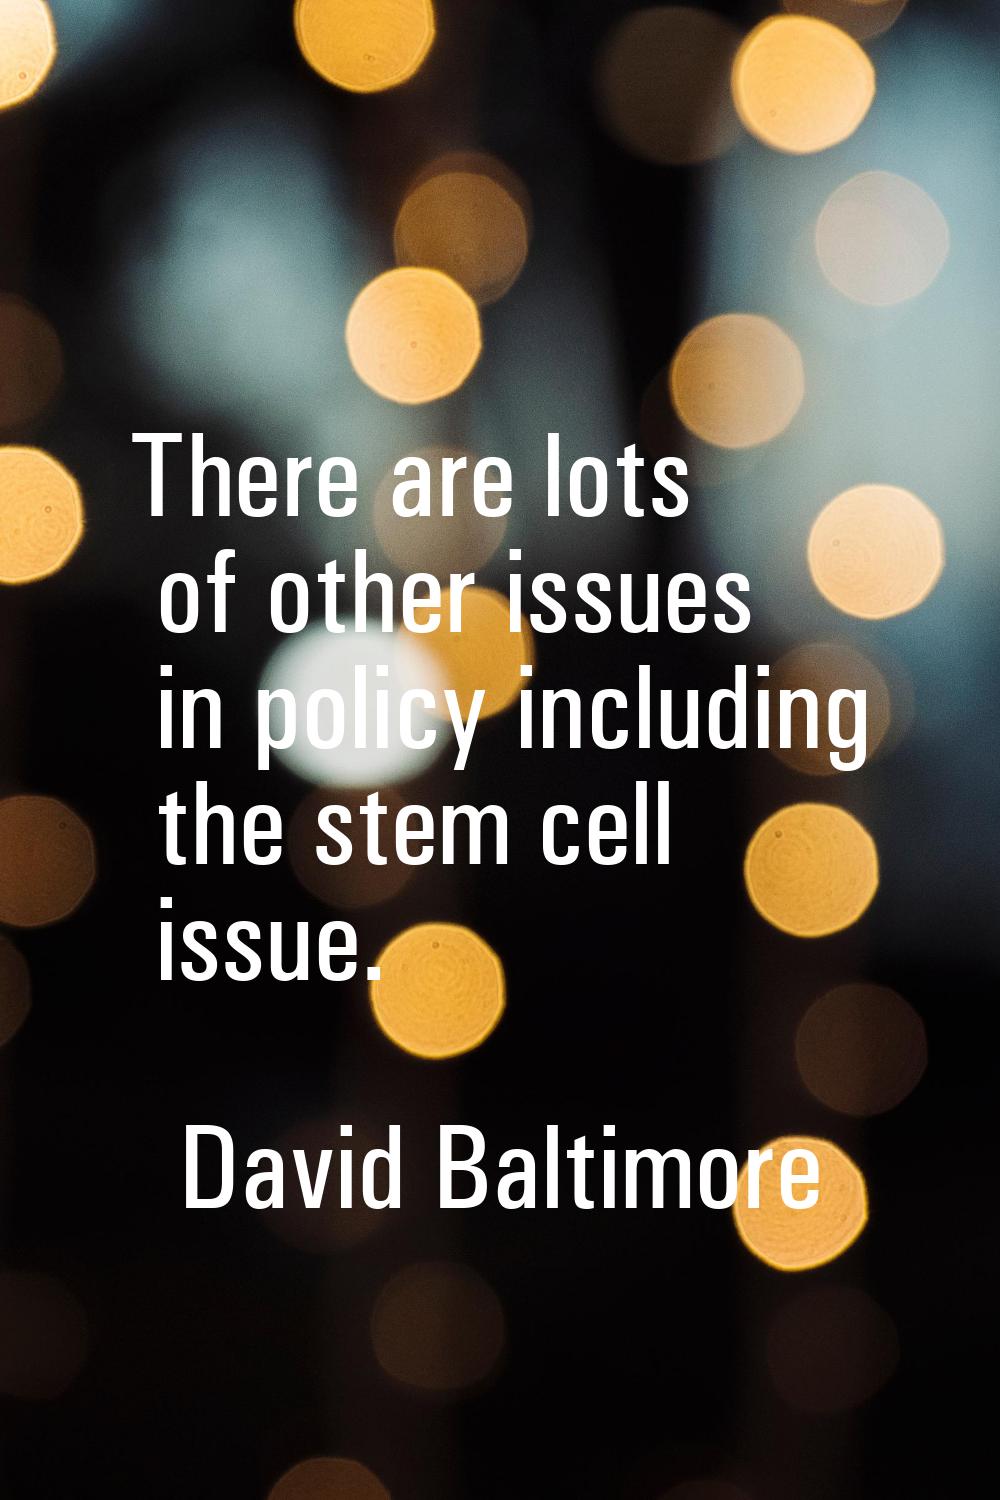 There are lots of other issues in policy including the stem cell issue.